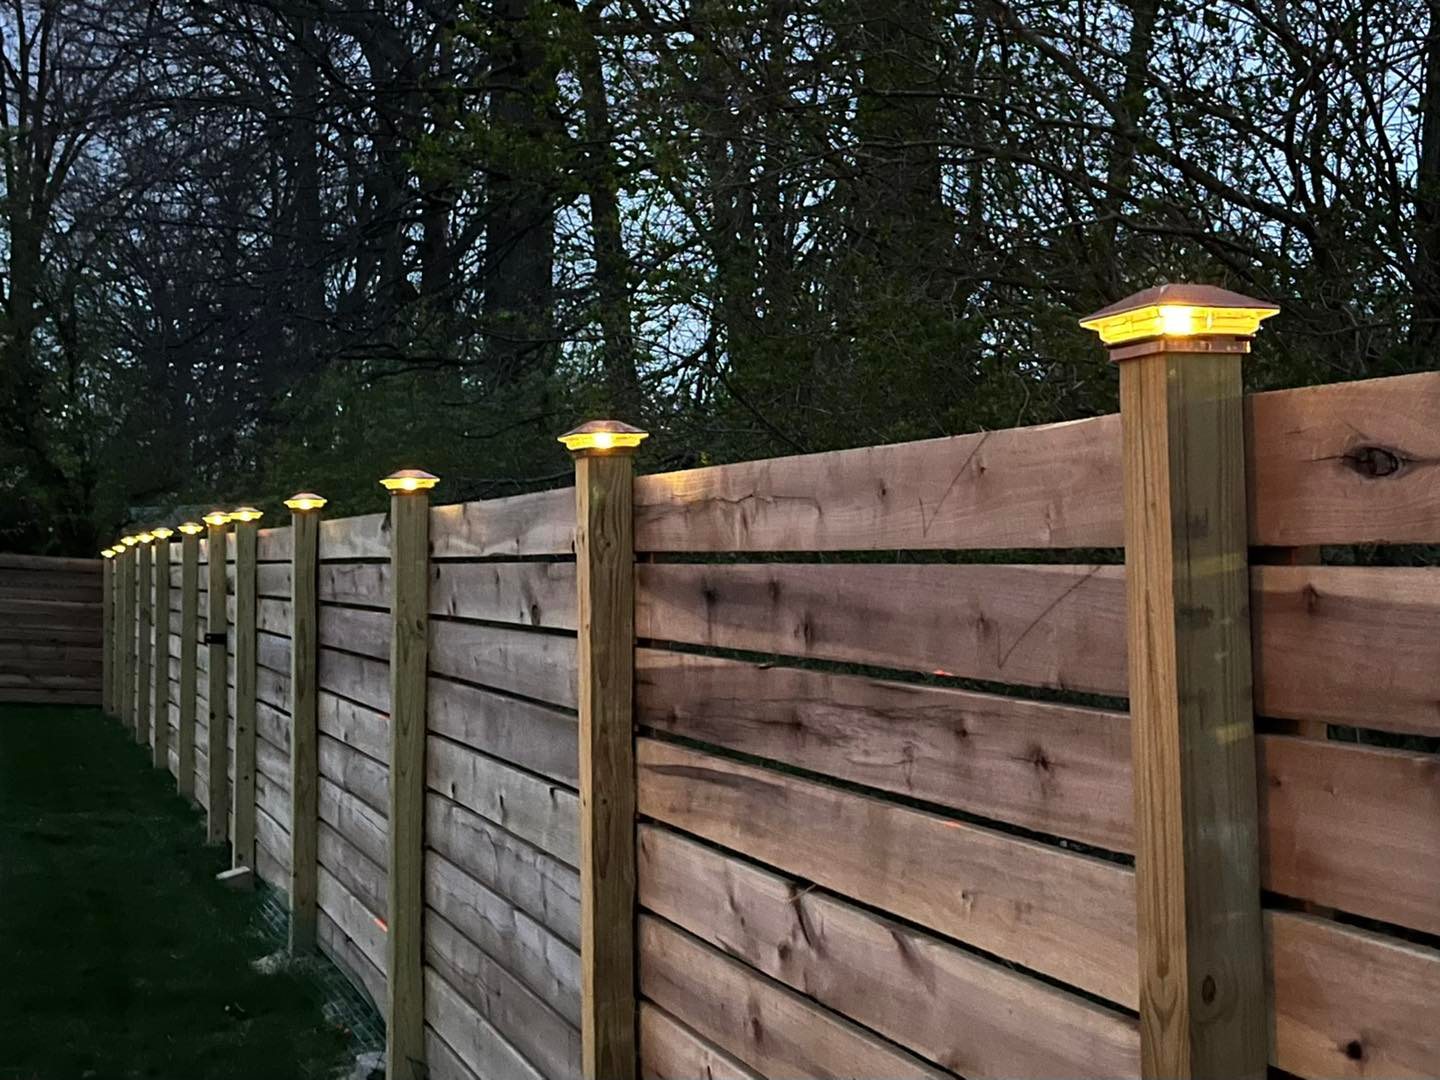 Residential Fencing - Wood Fences with Solar Post Lights